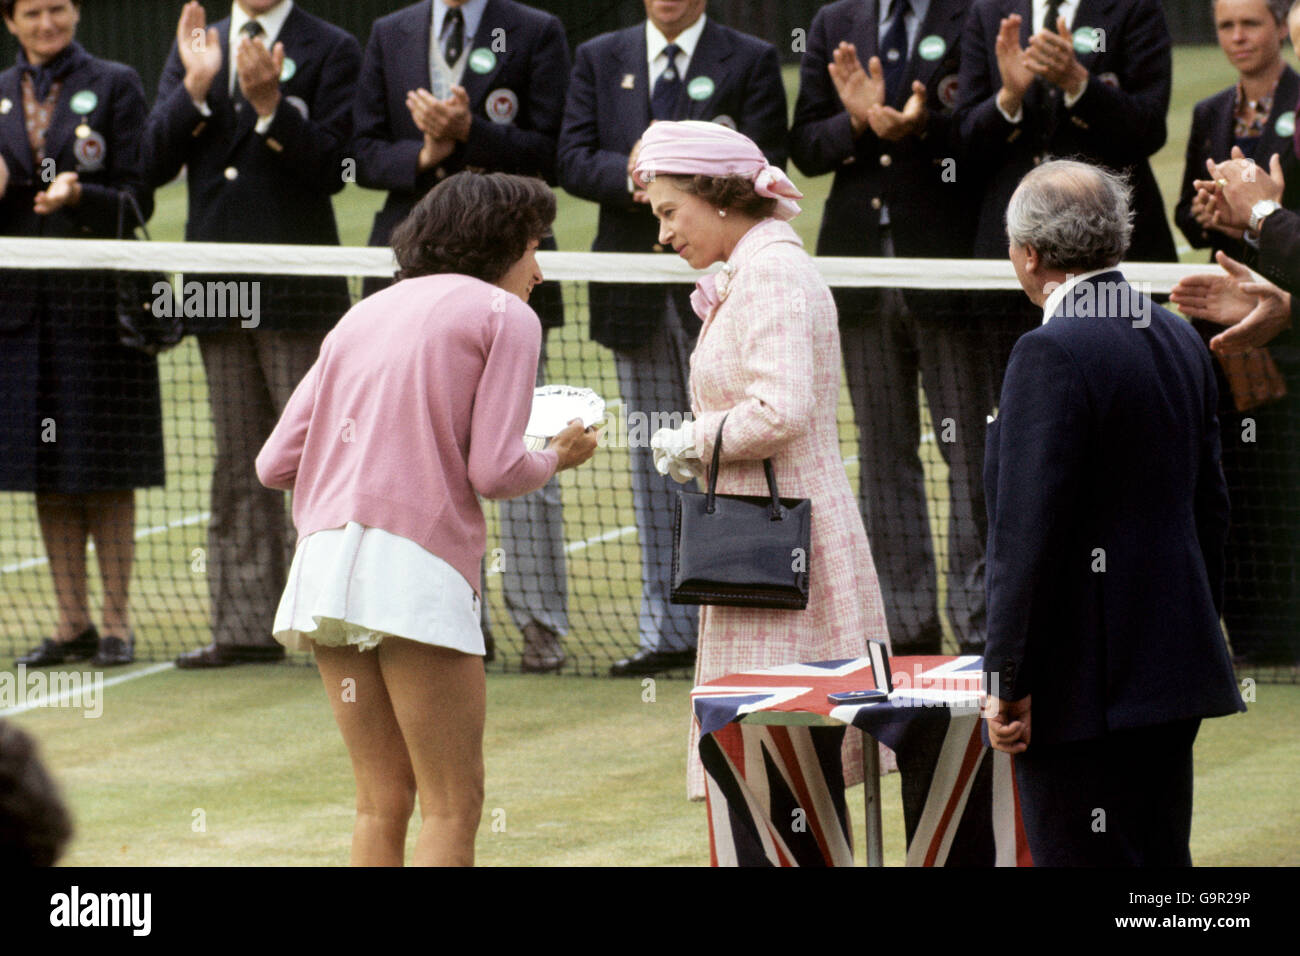 The Queen talking to Britain's Virginia Wade after presenting her with the trophy as Women's Singles Champion. Wade beat Betty Stove of the Netherlands 4-6 6-3 6-1. Stock Photo